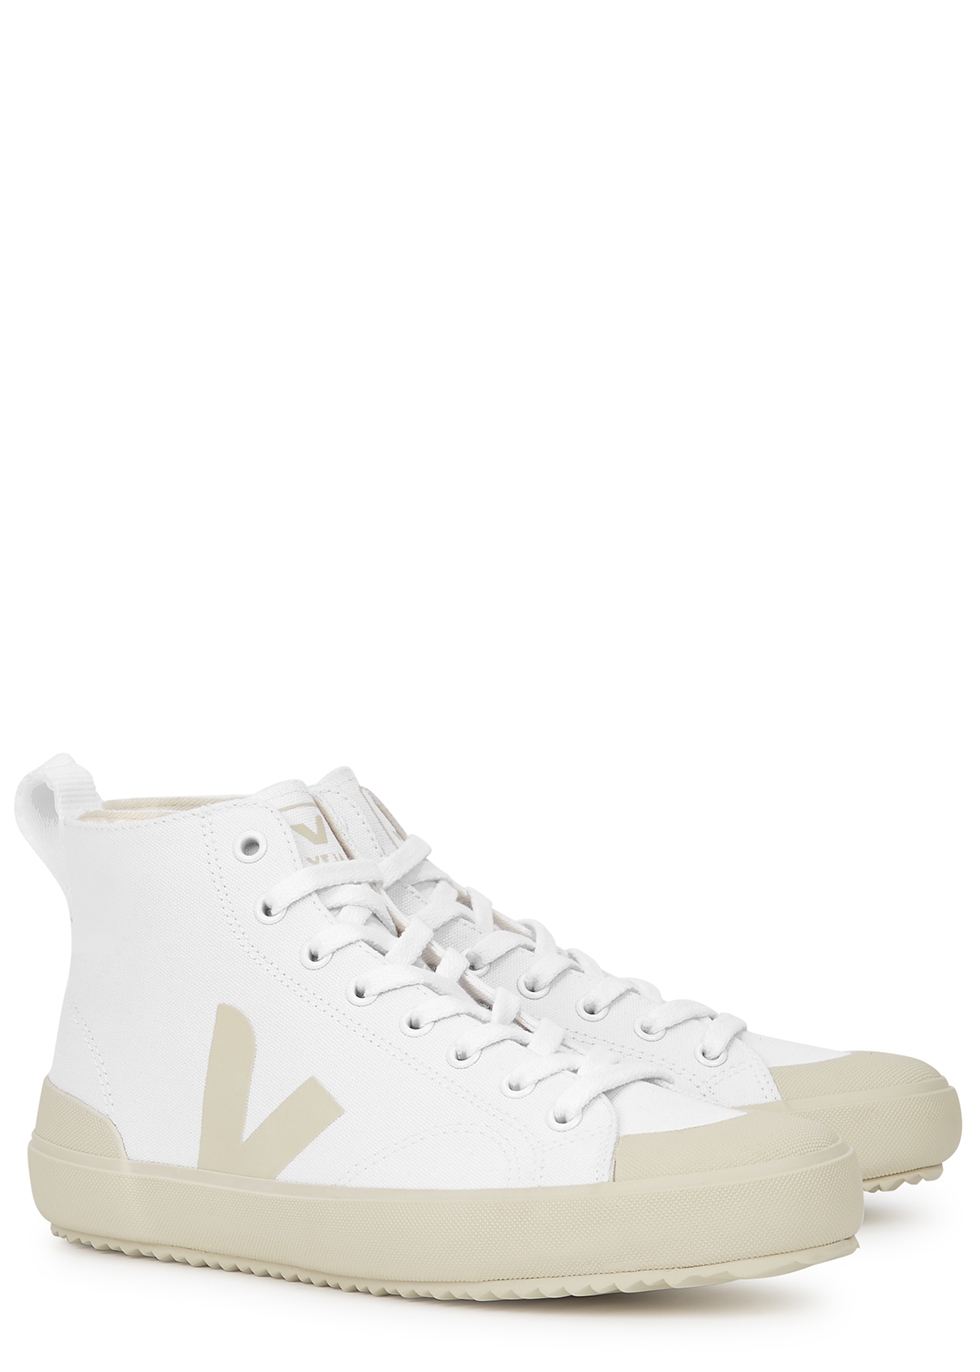 white canvas shoes high top